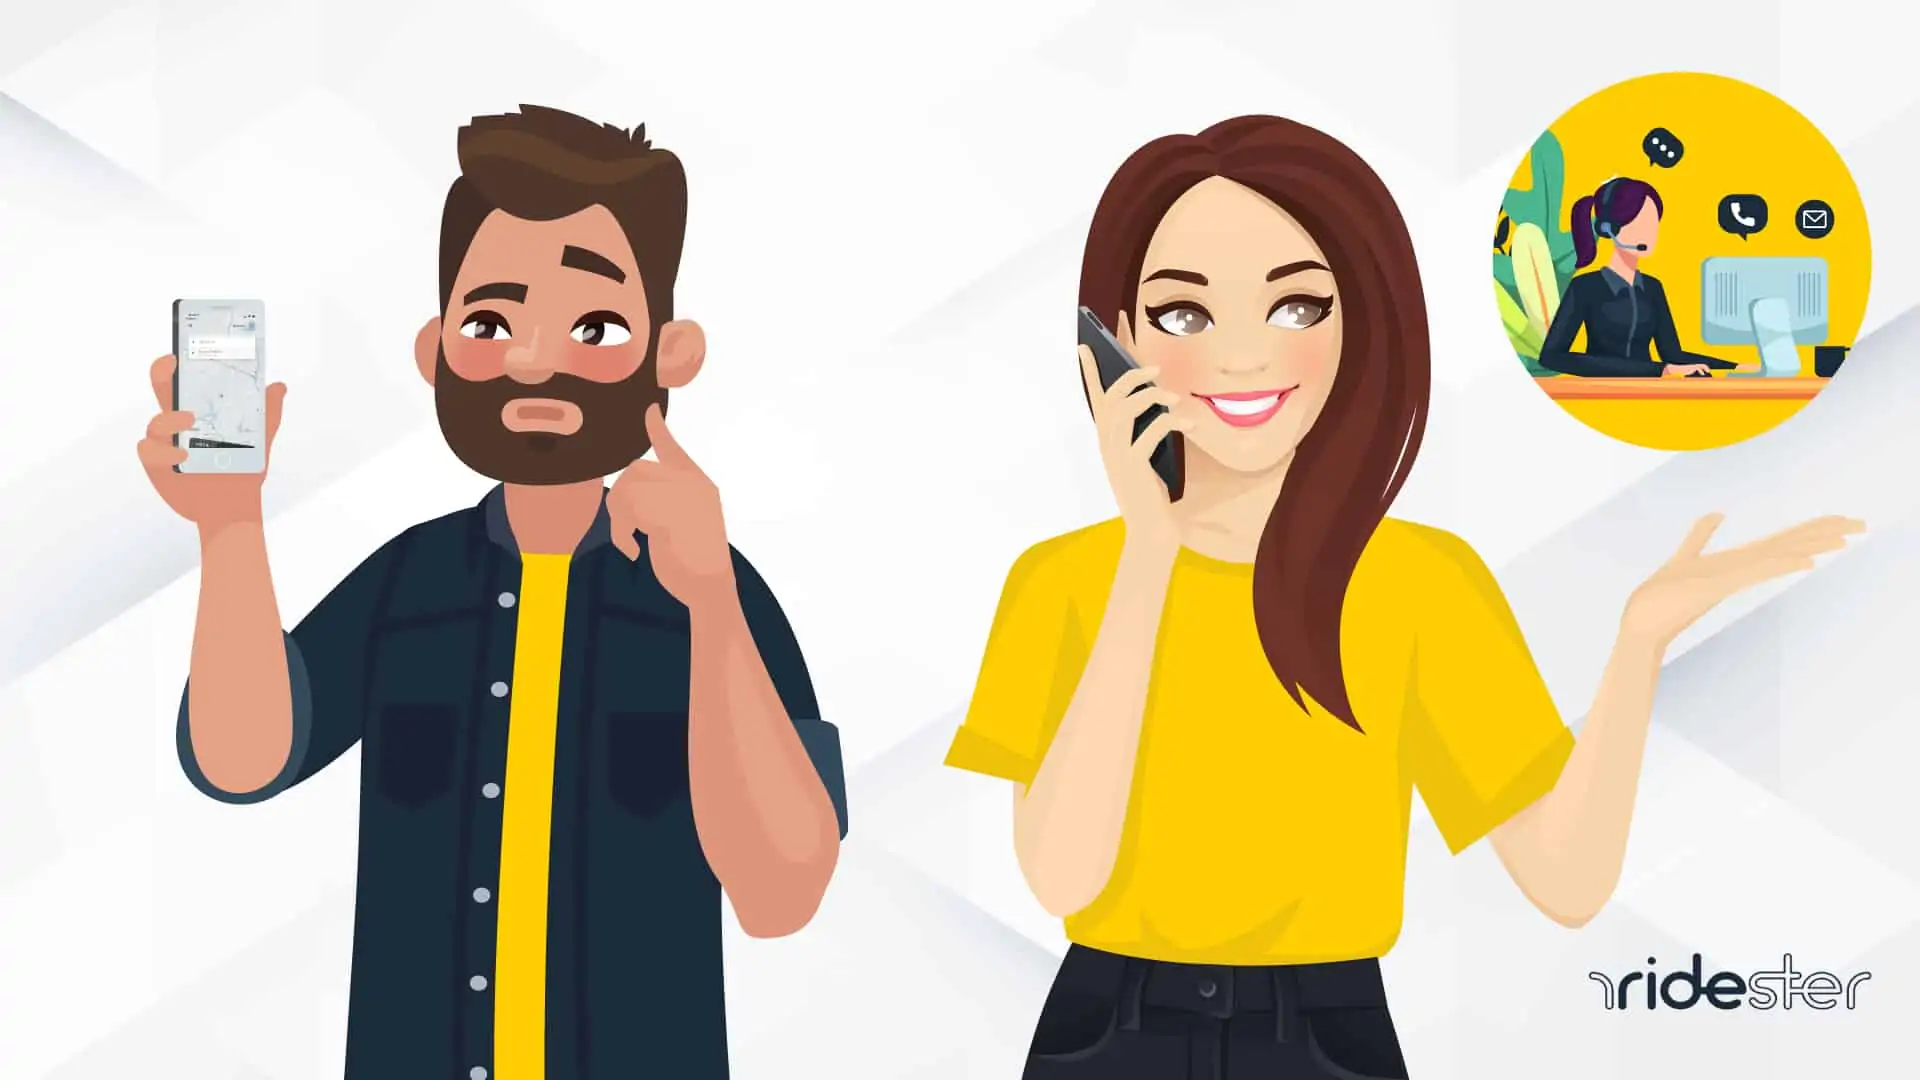 vector image of a man holding the uber app while a vector woman calls Uber customer service on her cell phone